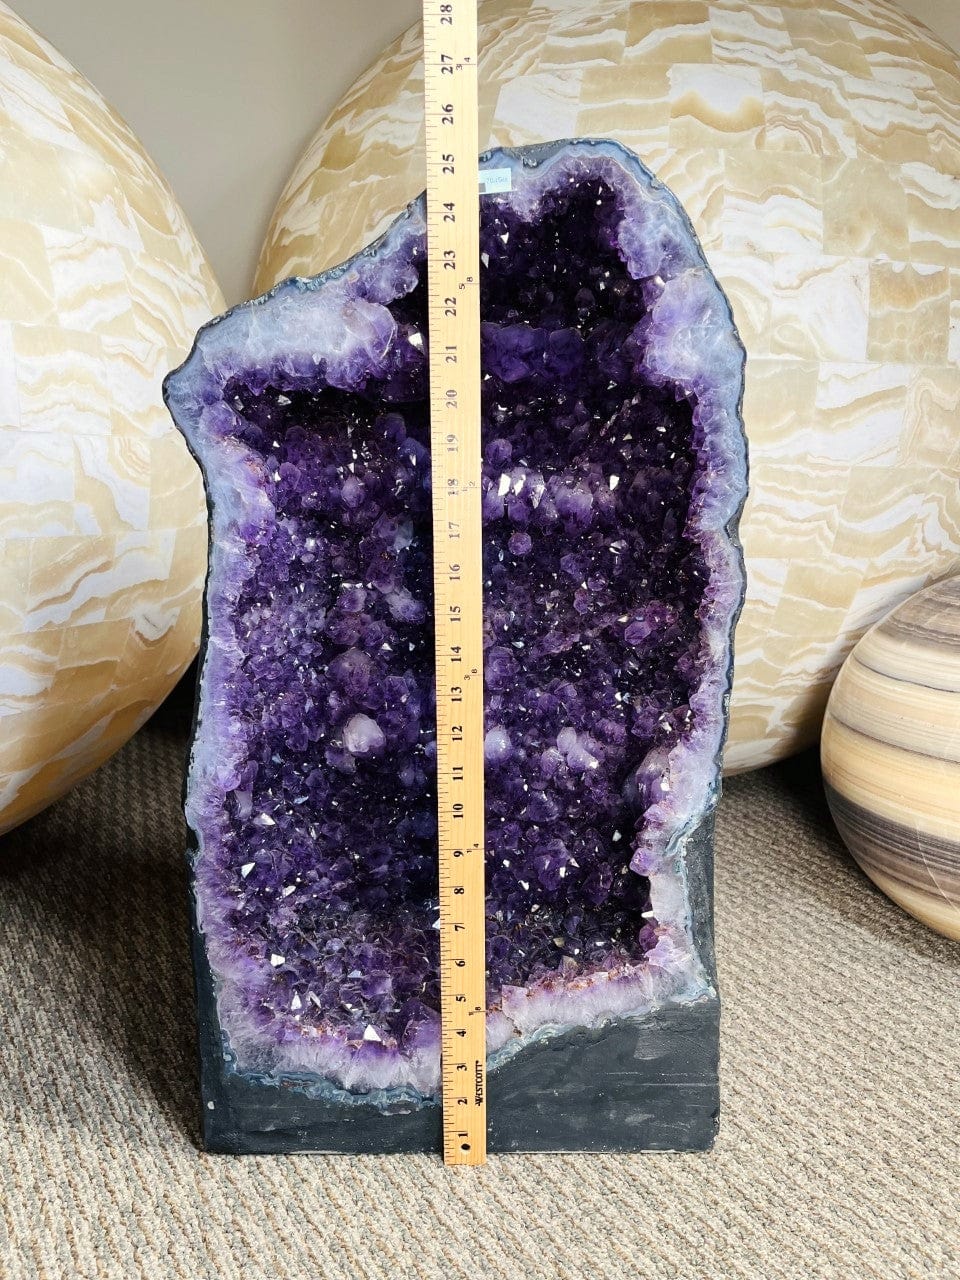 Amethyst Crystal Cathedral Geode with a ruler for size reference